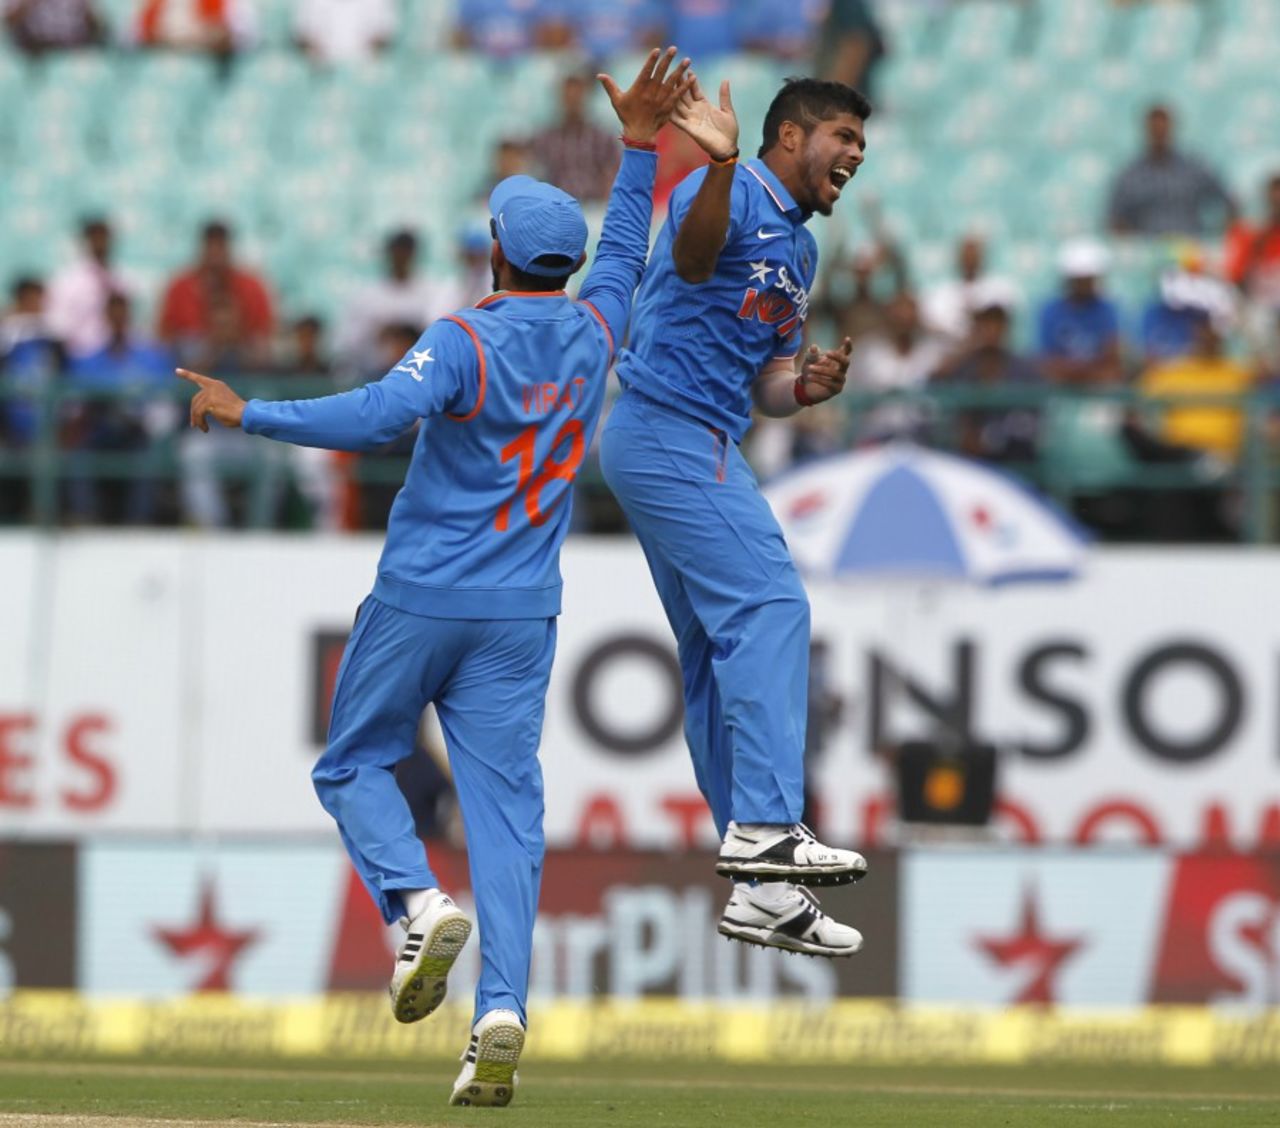 Umesh Yadav celebrates one of his two early wickets, India v New Zealand, 1st ODI, Dharamsala, October 16, 2016